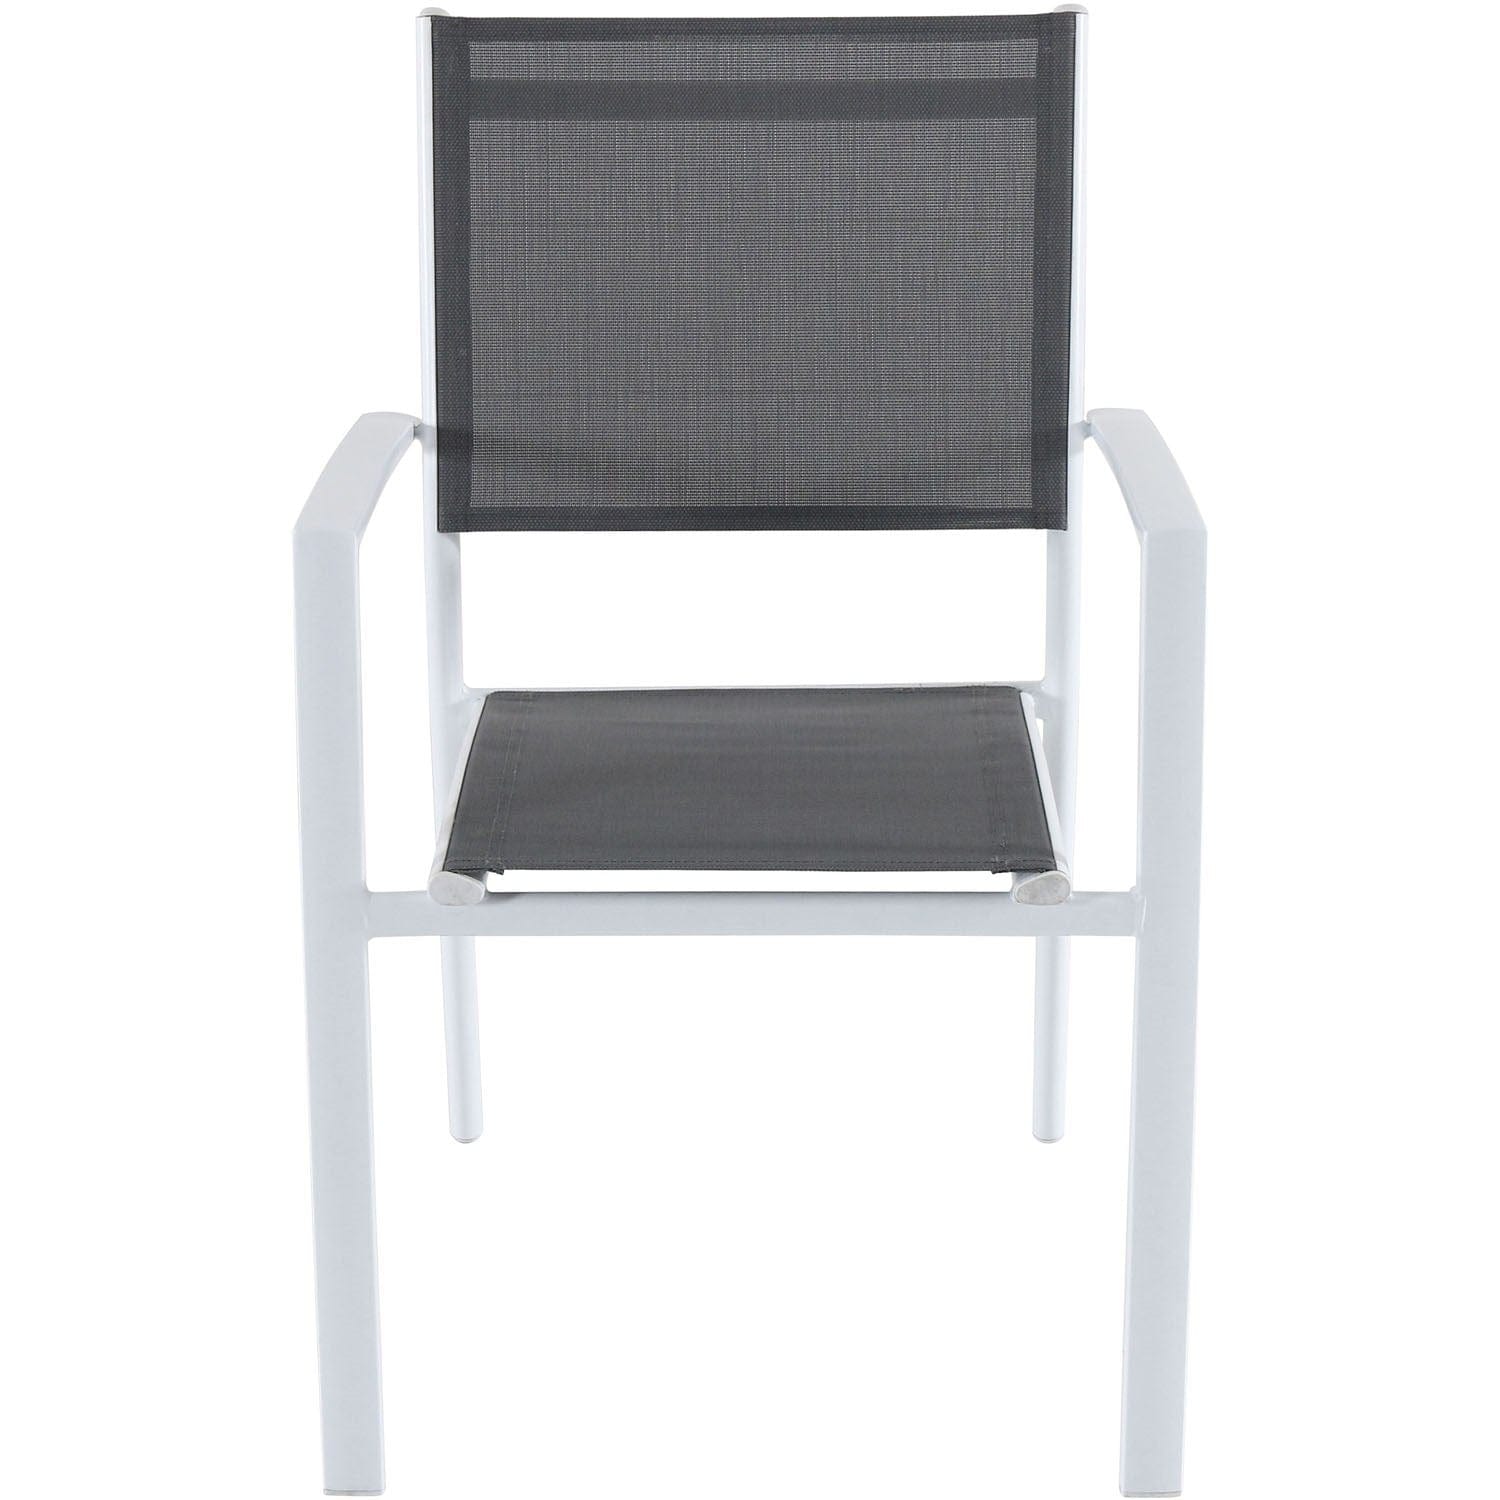 Hanover Outdoor Dining Set Hanover - Naples5pc: 4 Aluminum Sling Back Chairs, 38" Sq Slat Top Table